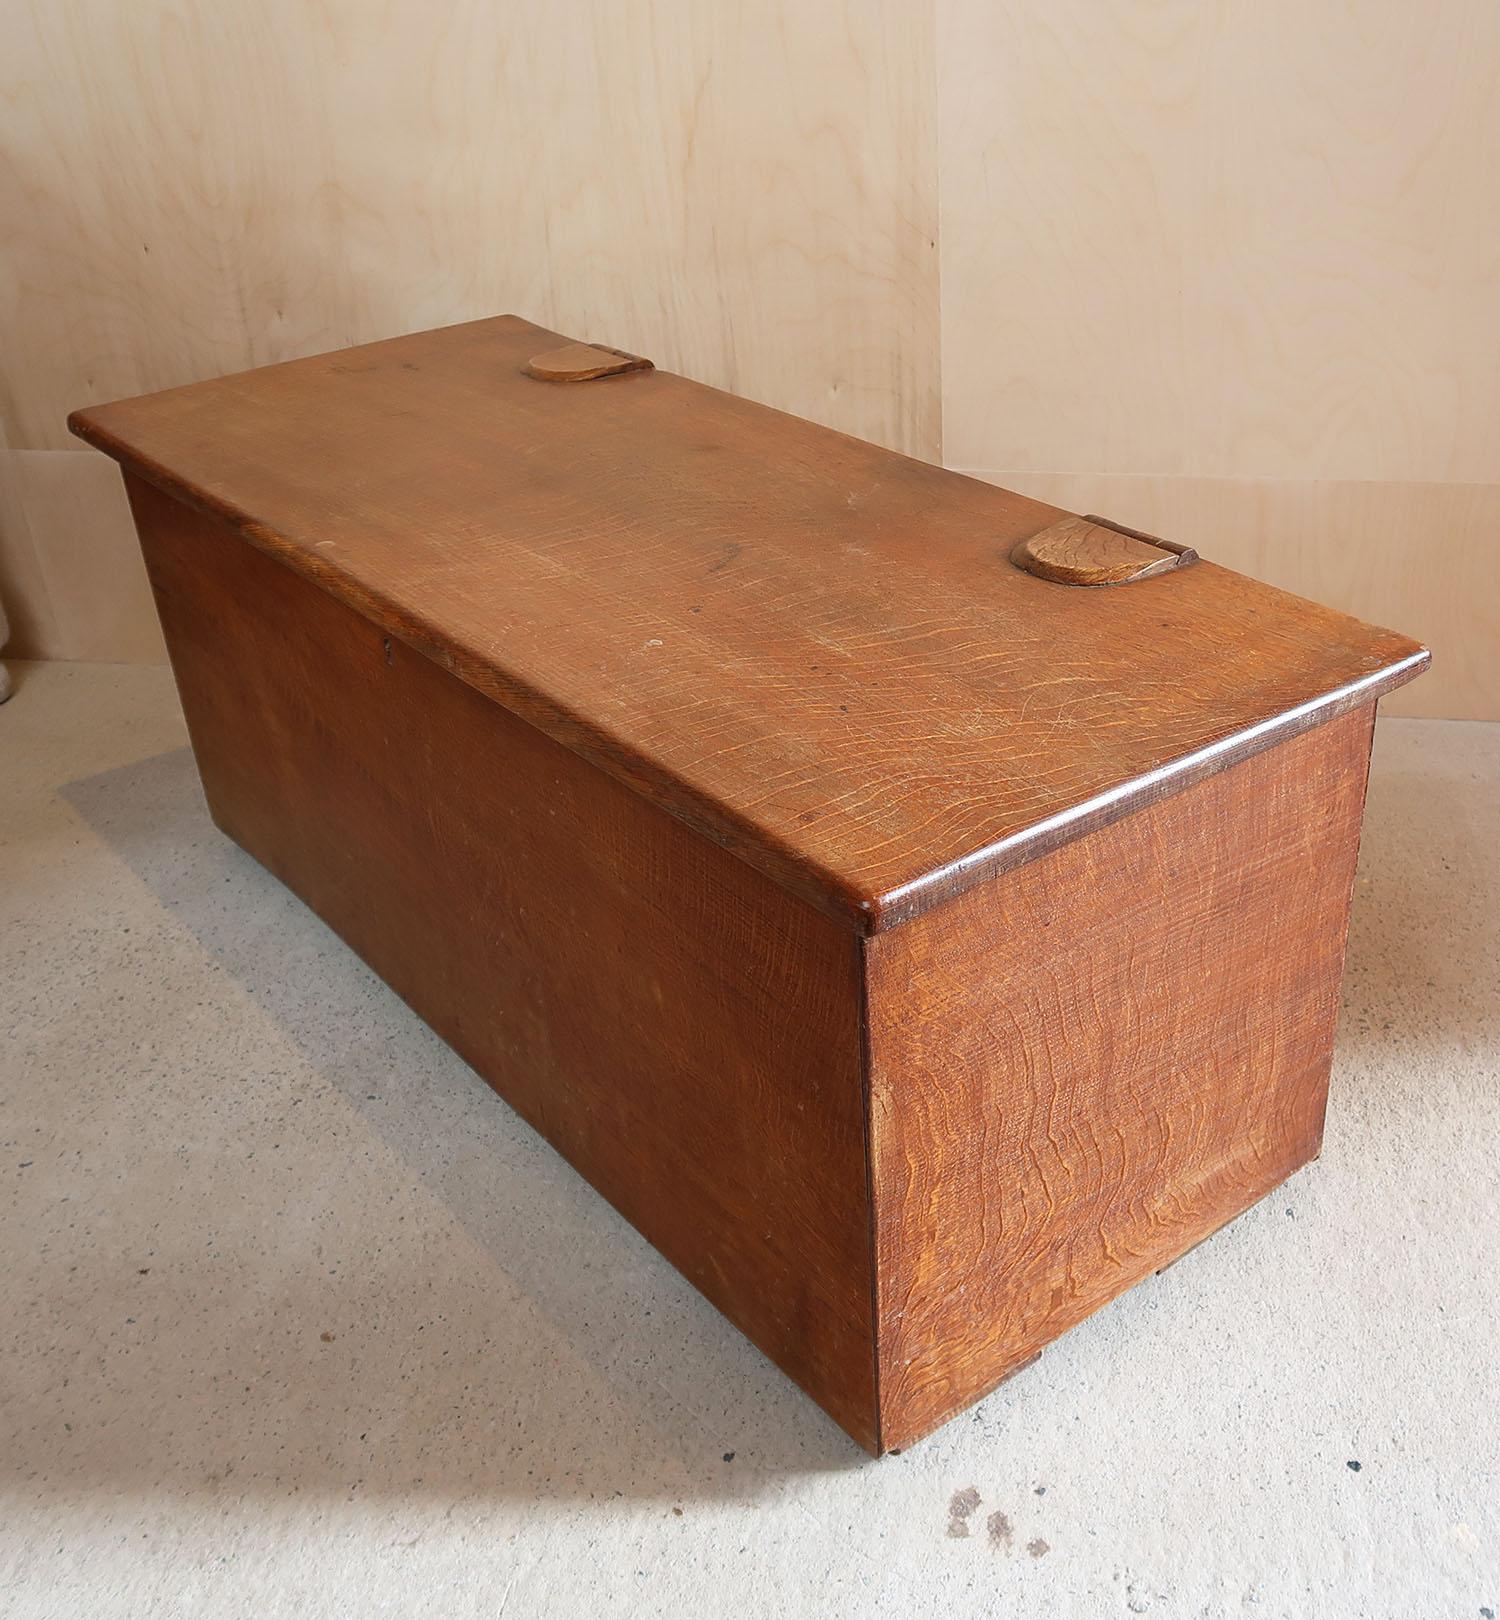 Wonderful oak chest or box.

This is a very special piece. The best quality of cabinet making and the finest choice of timber.

Probably made in the Cotswolds, England

The hinges are wooden and also wooden wheels underneath

Great for the